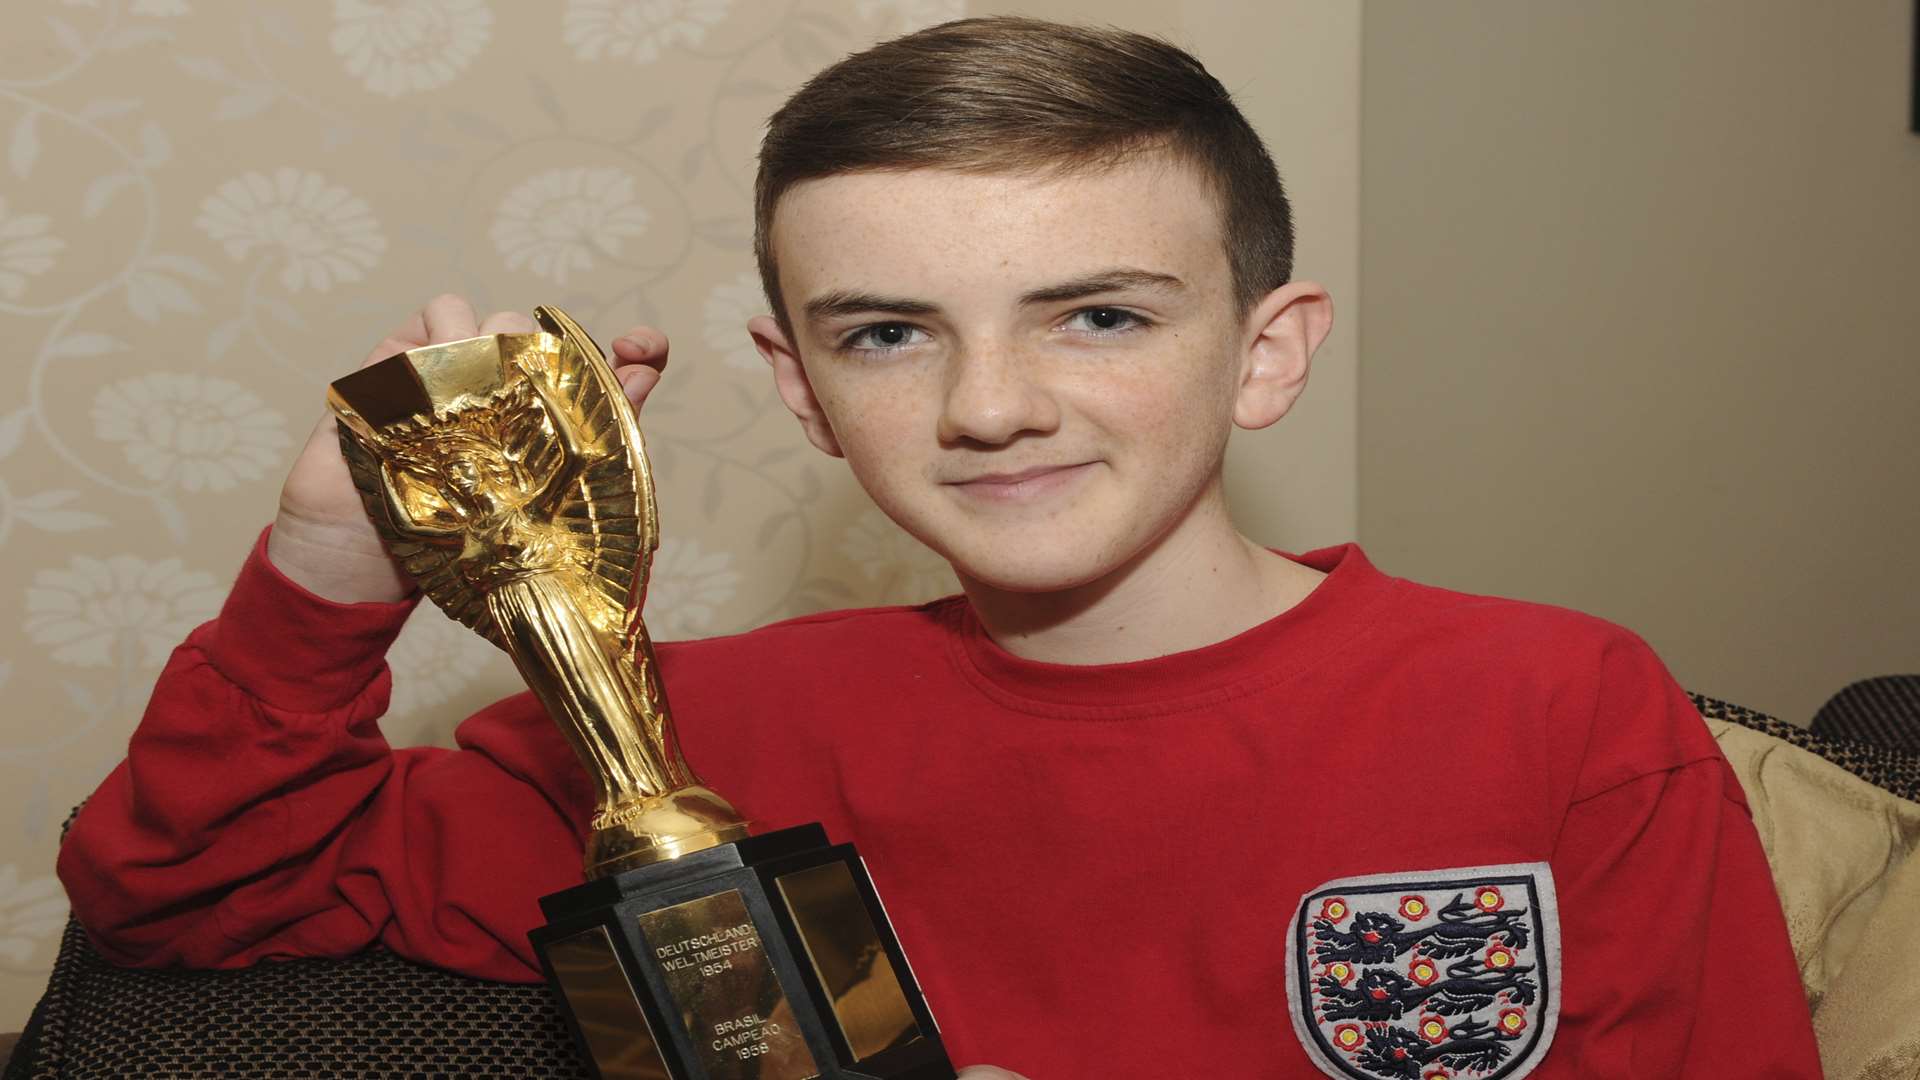 Jonjo Heuerman is the youngest person to receive the British Empire Medal. With replica Jules Rimet World Cup football trophy. Picture: Steve Crispe